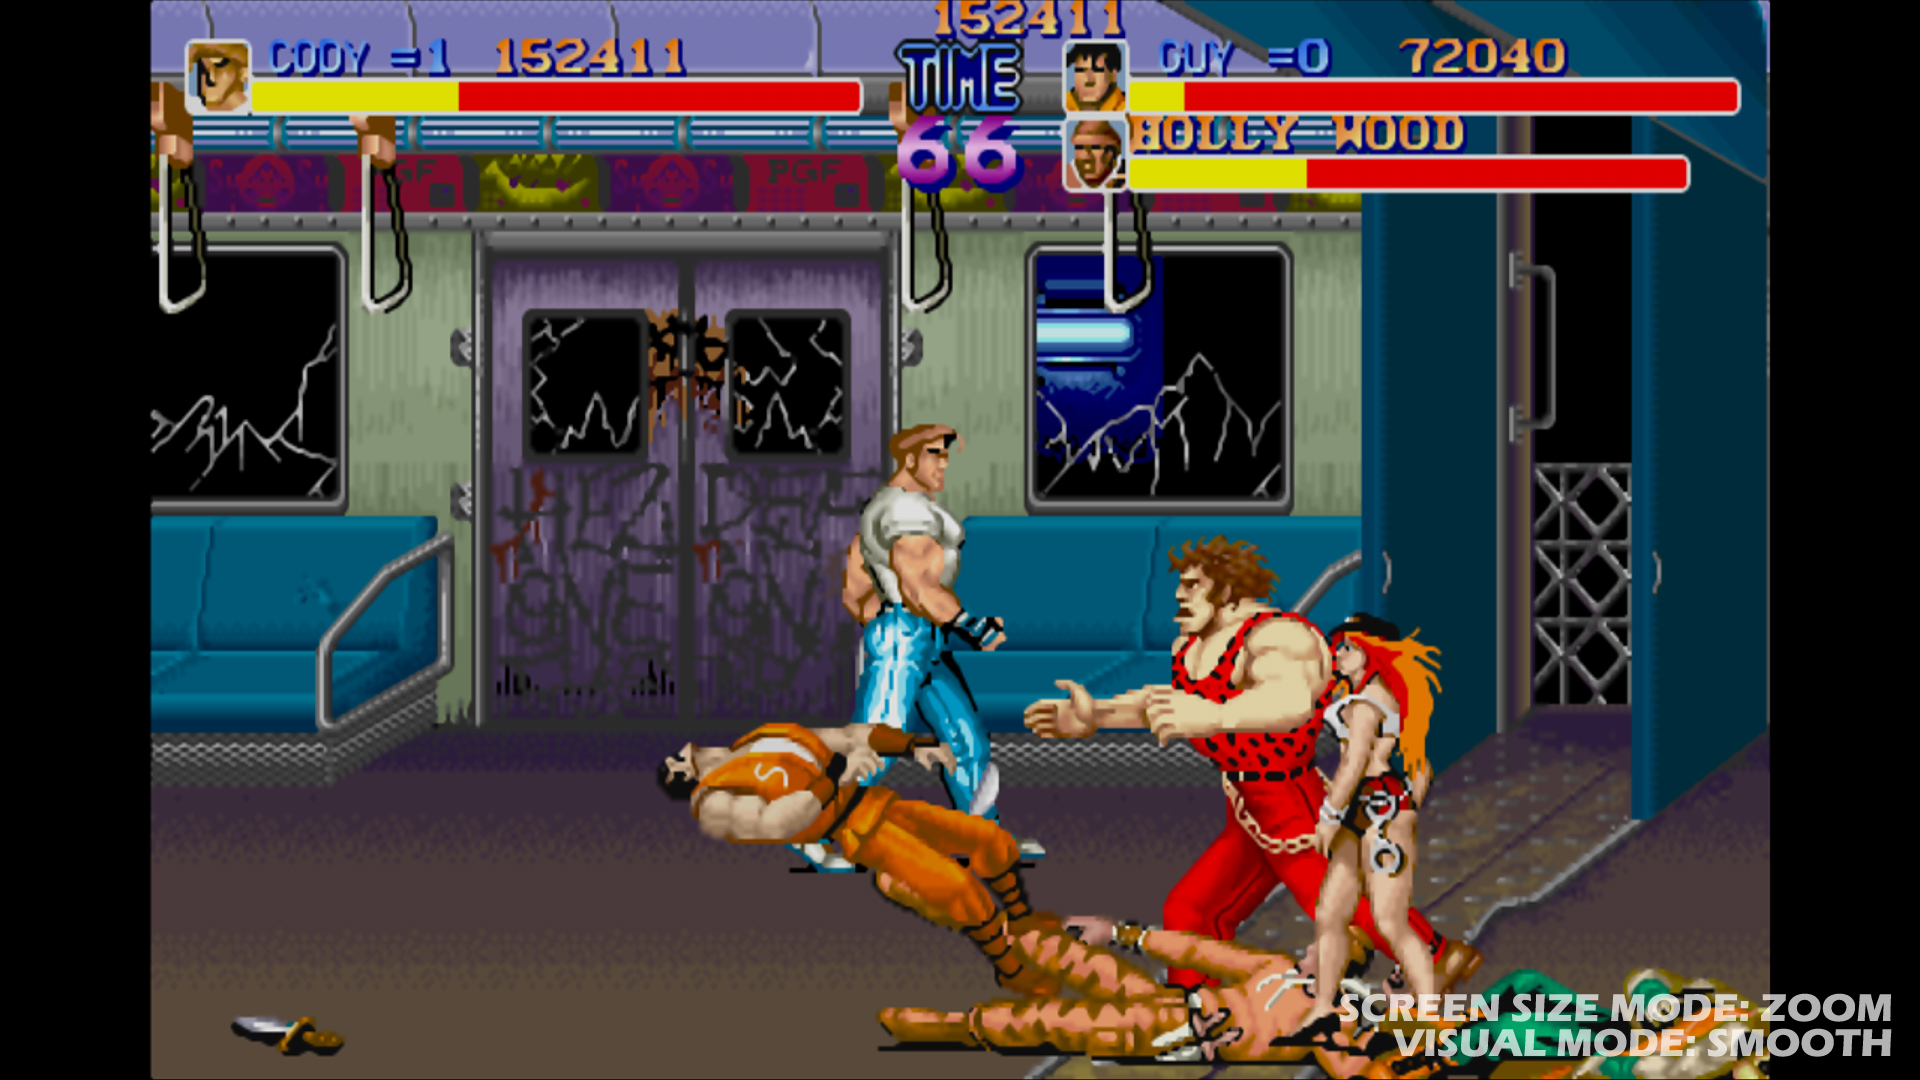 A screenshot from Final Fight, a braling video game by Capcom